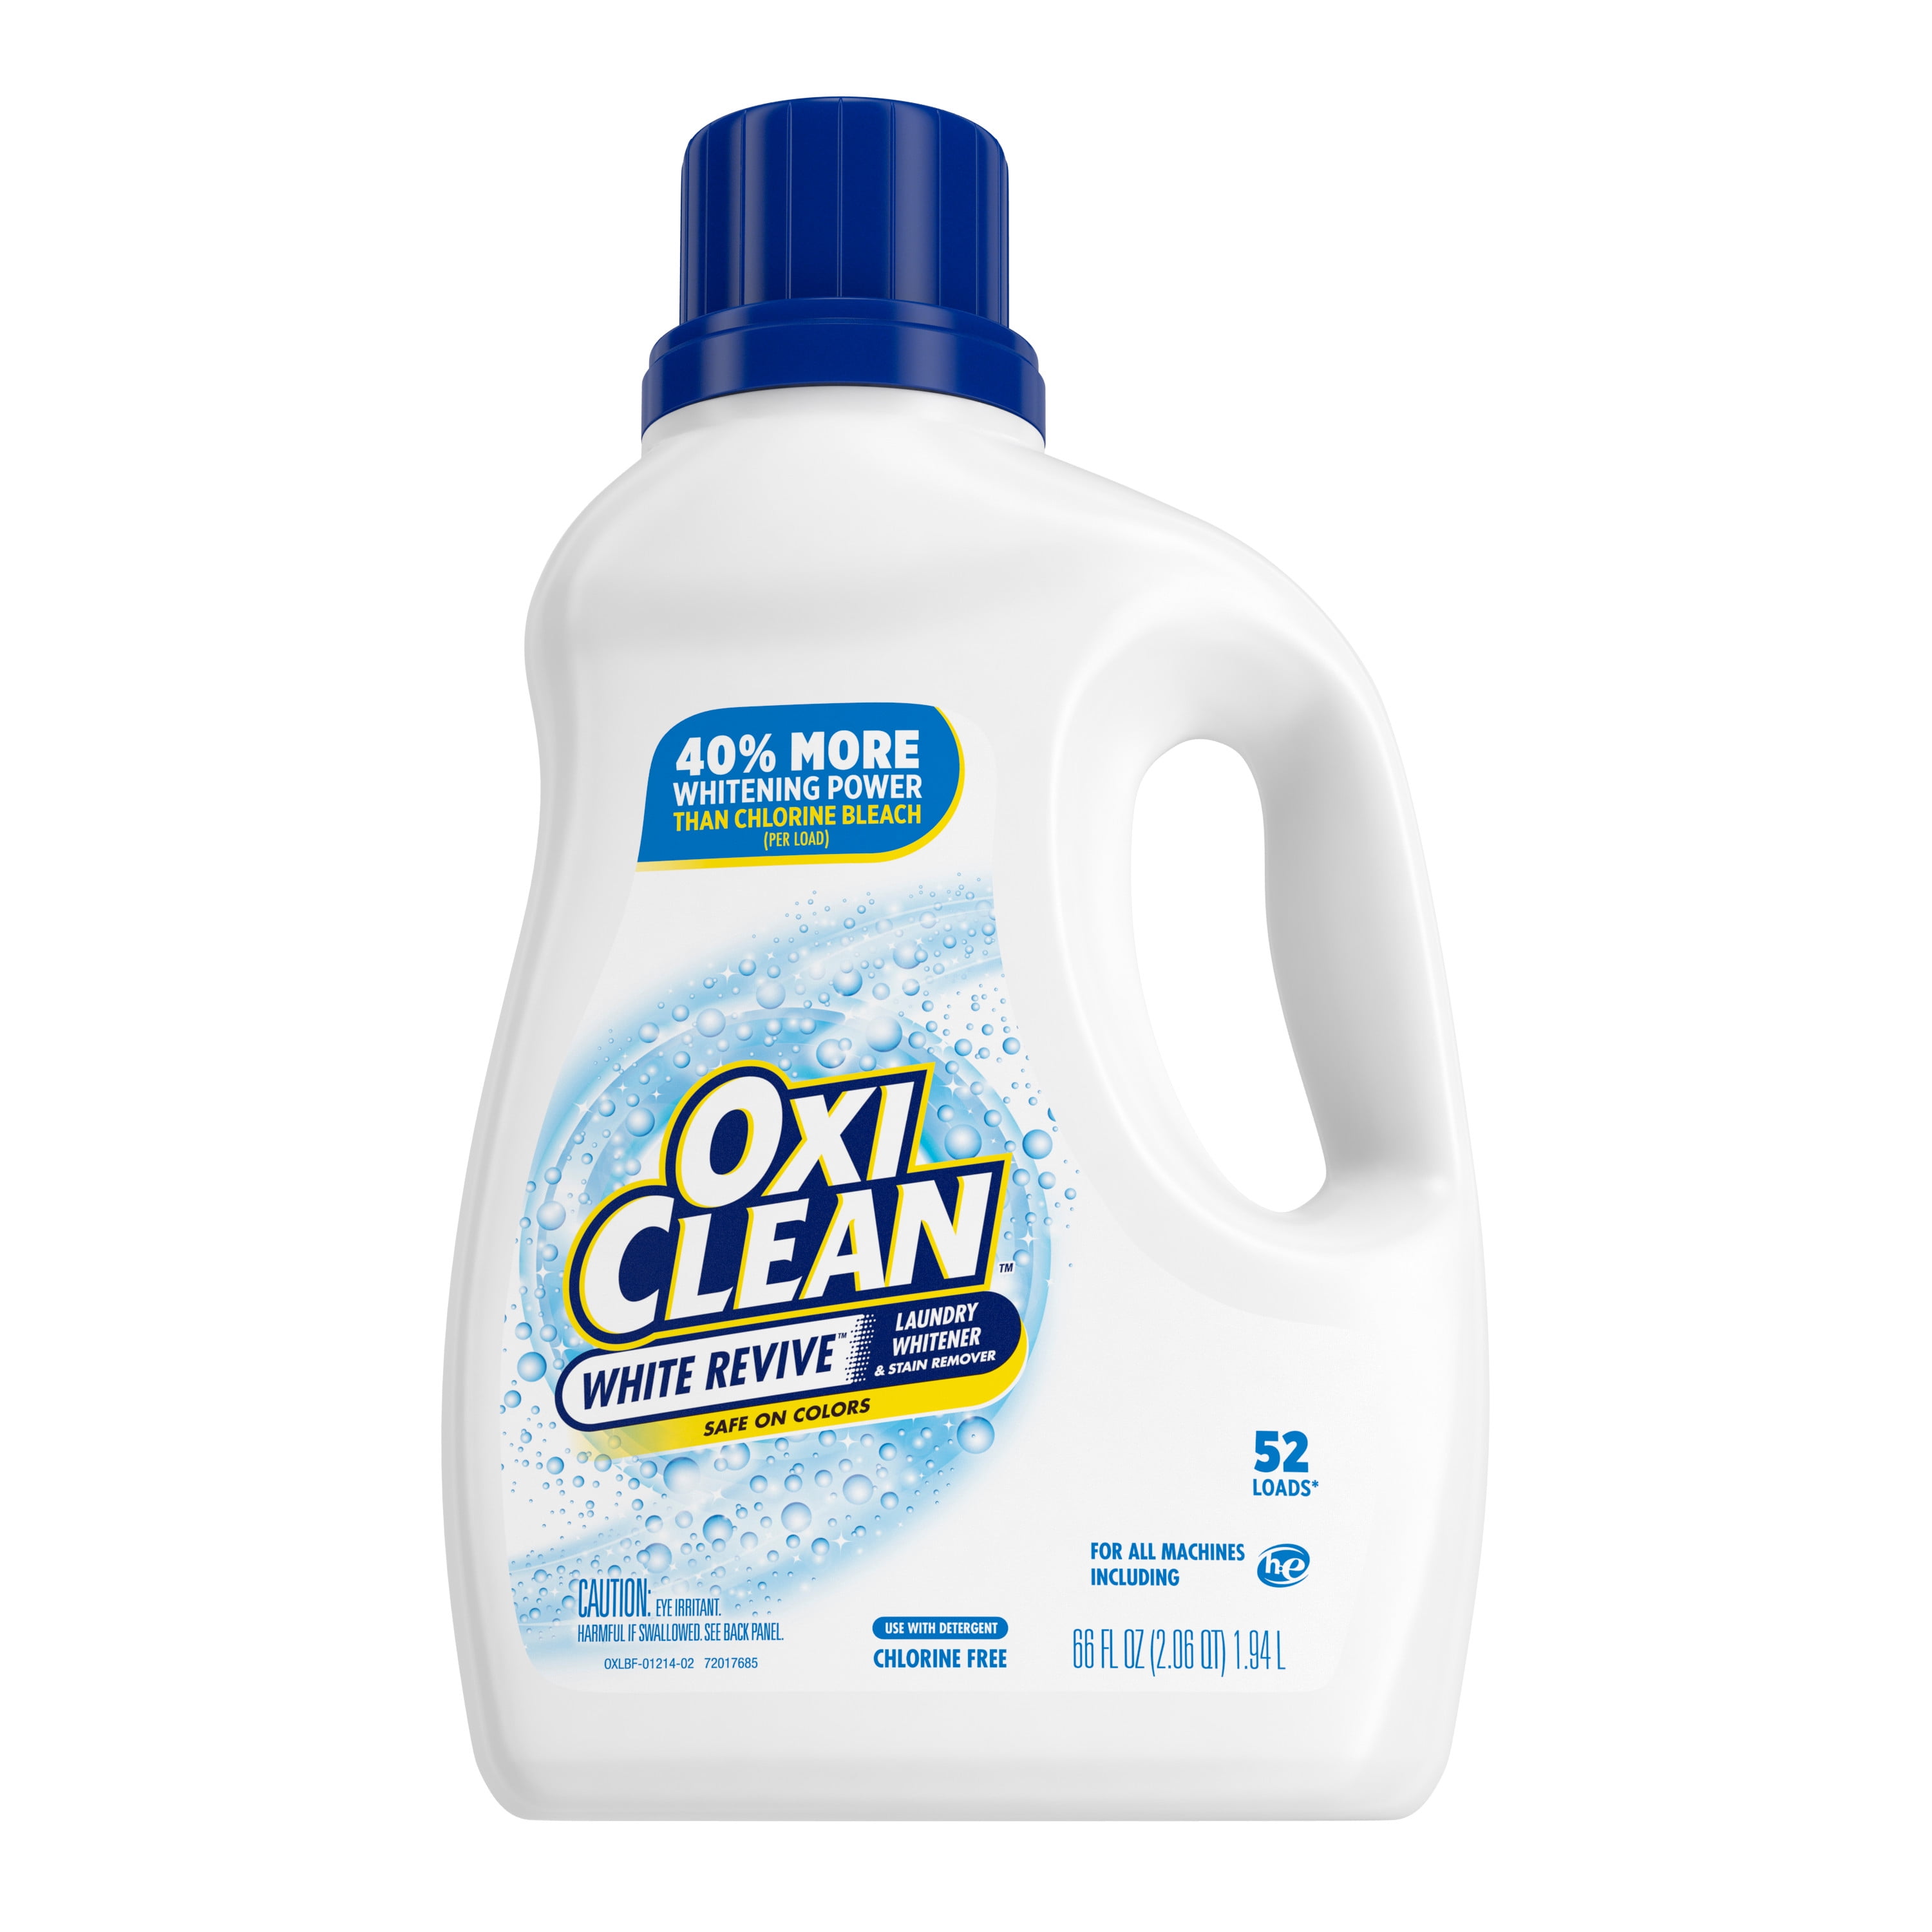 OxiClean White Revive Laundry Whitener and Stain Remover Liquid, 40.5 fl oz